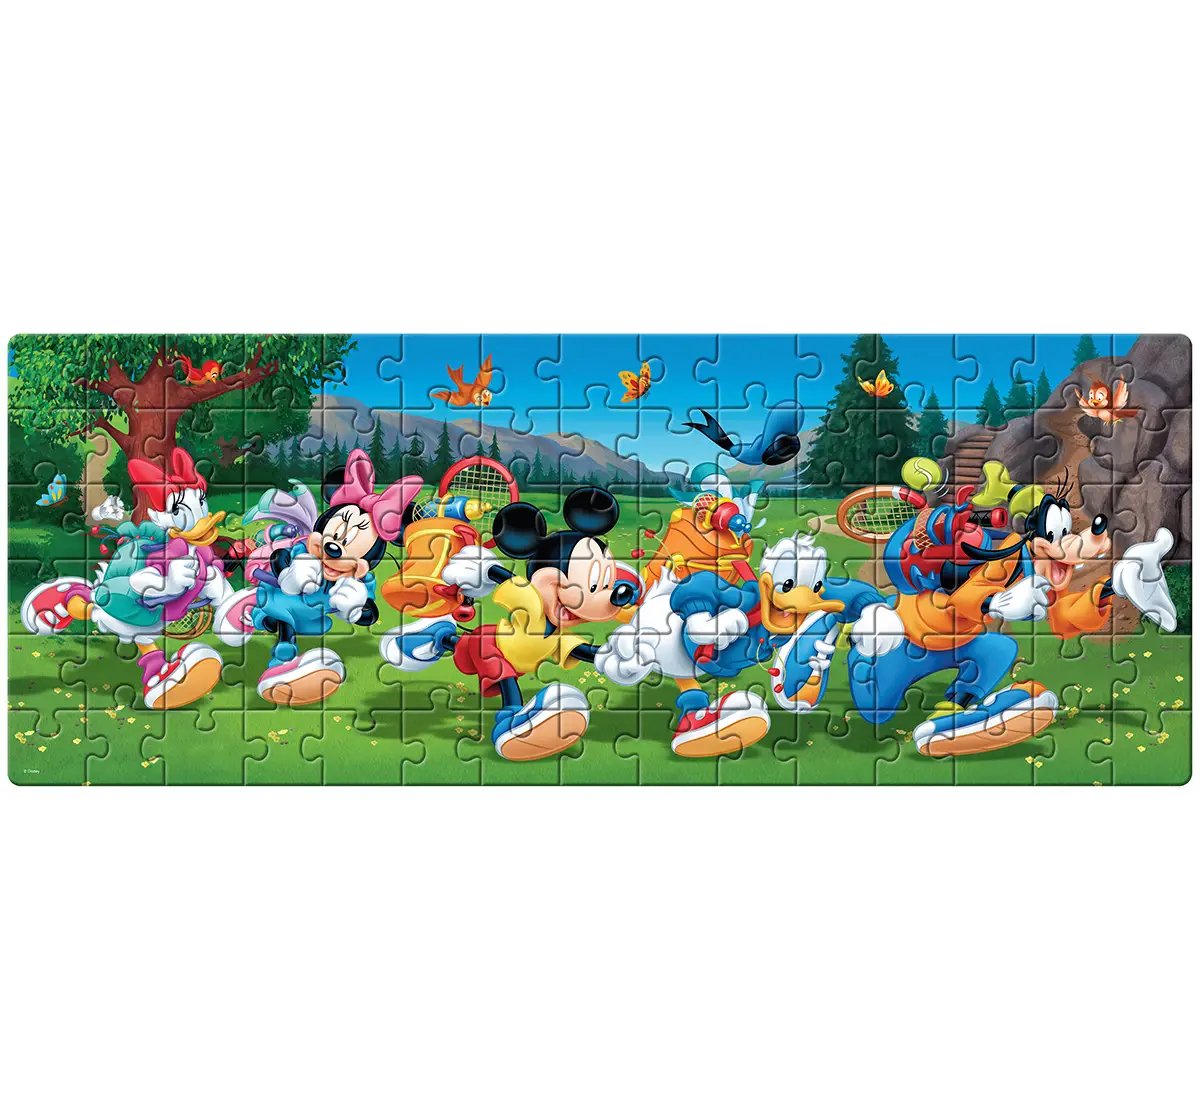 Disney Frank Mickey Mouse Panorama Puzzle (90pcs), 6Y+